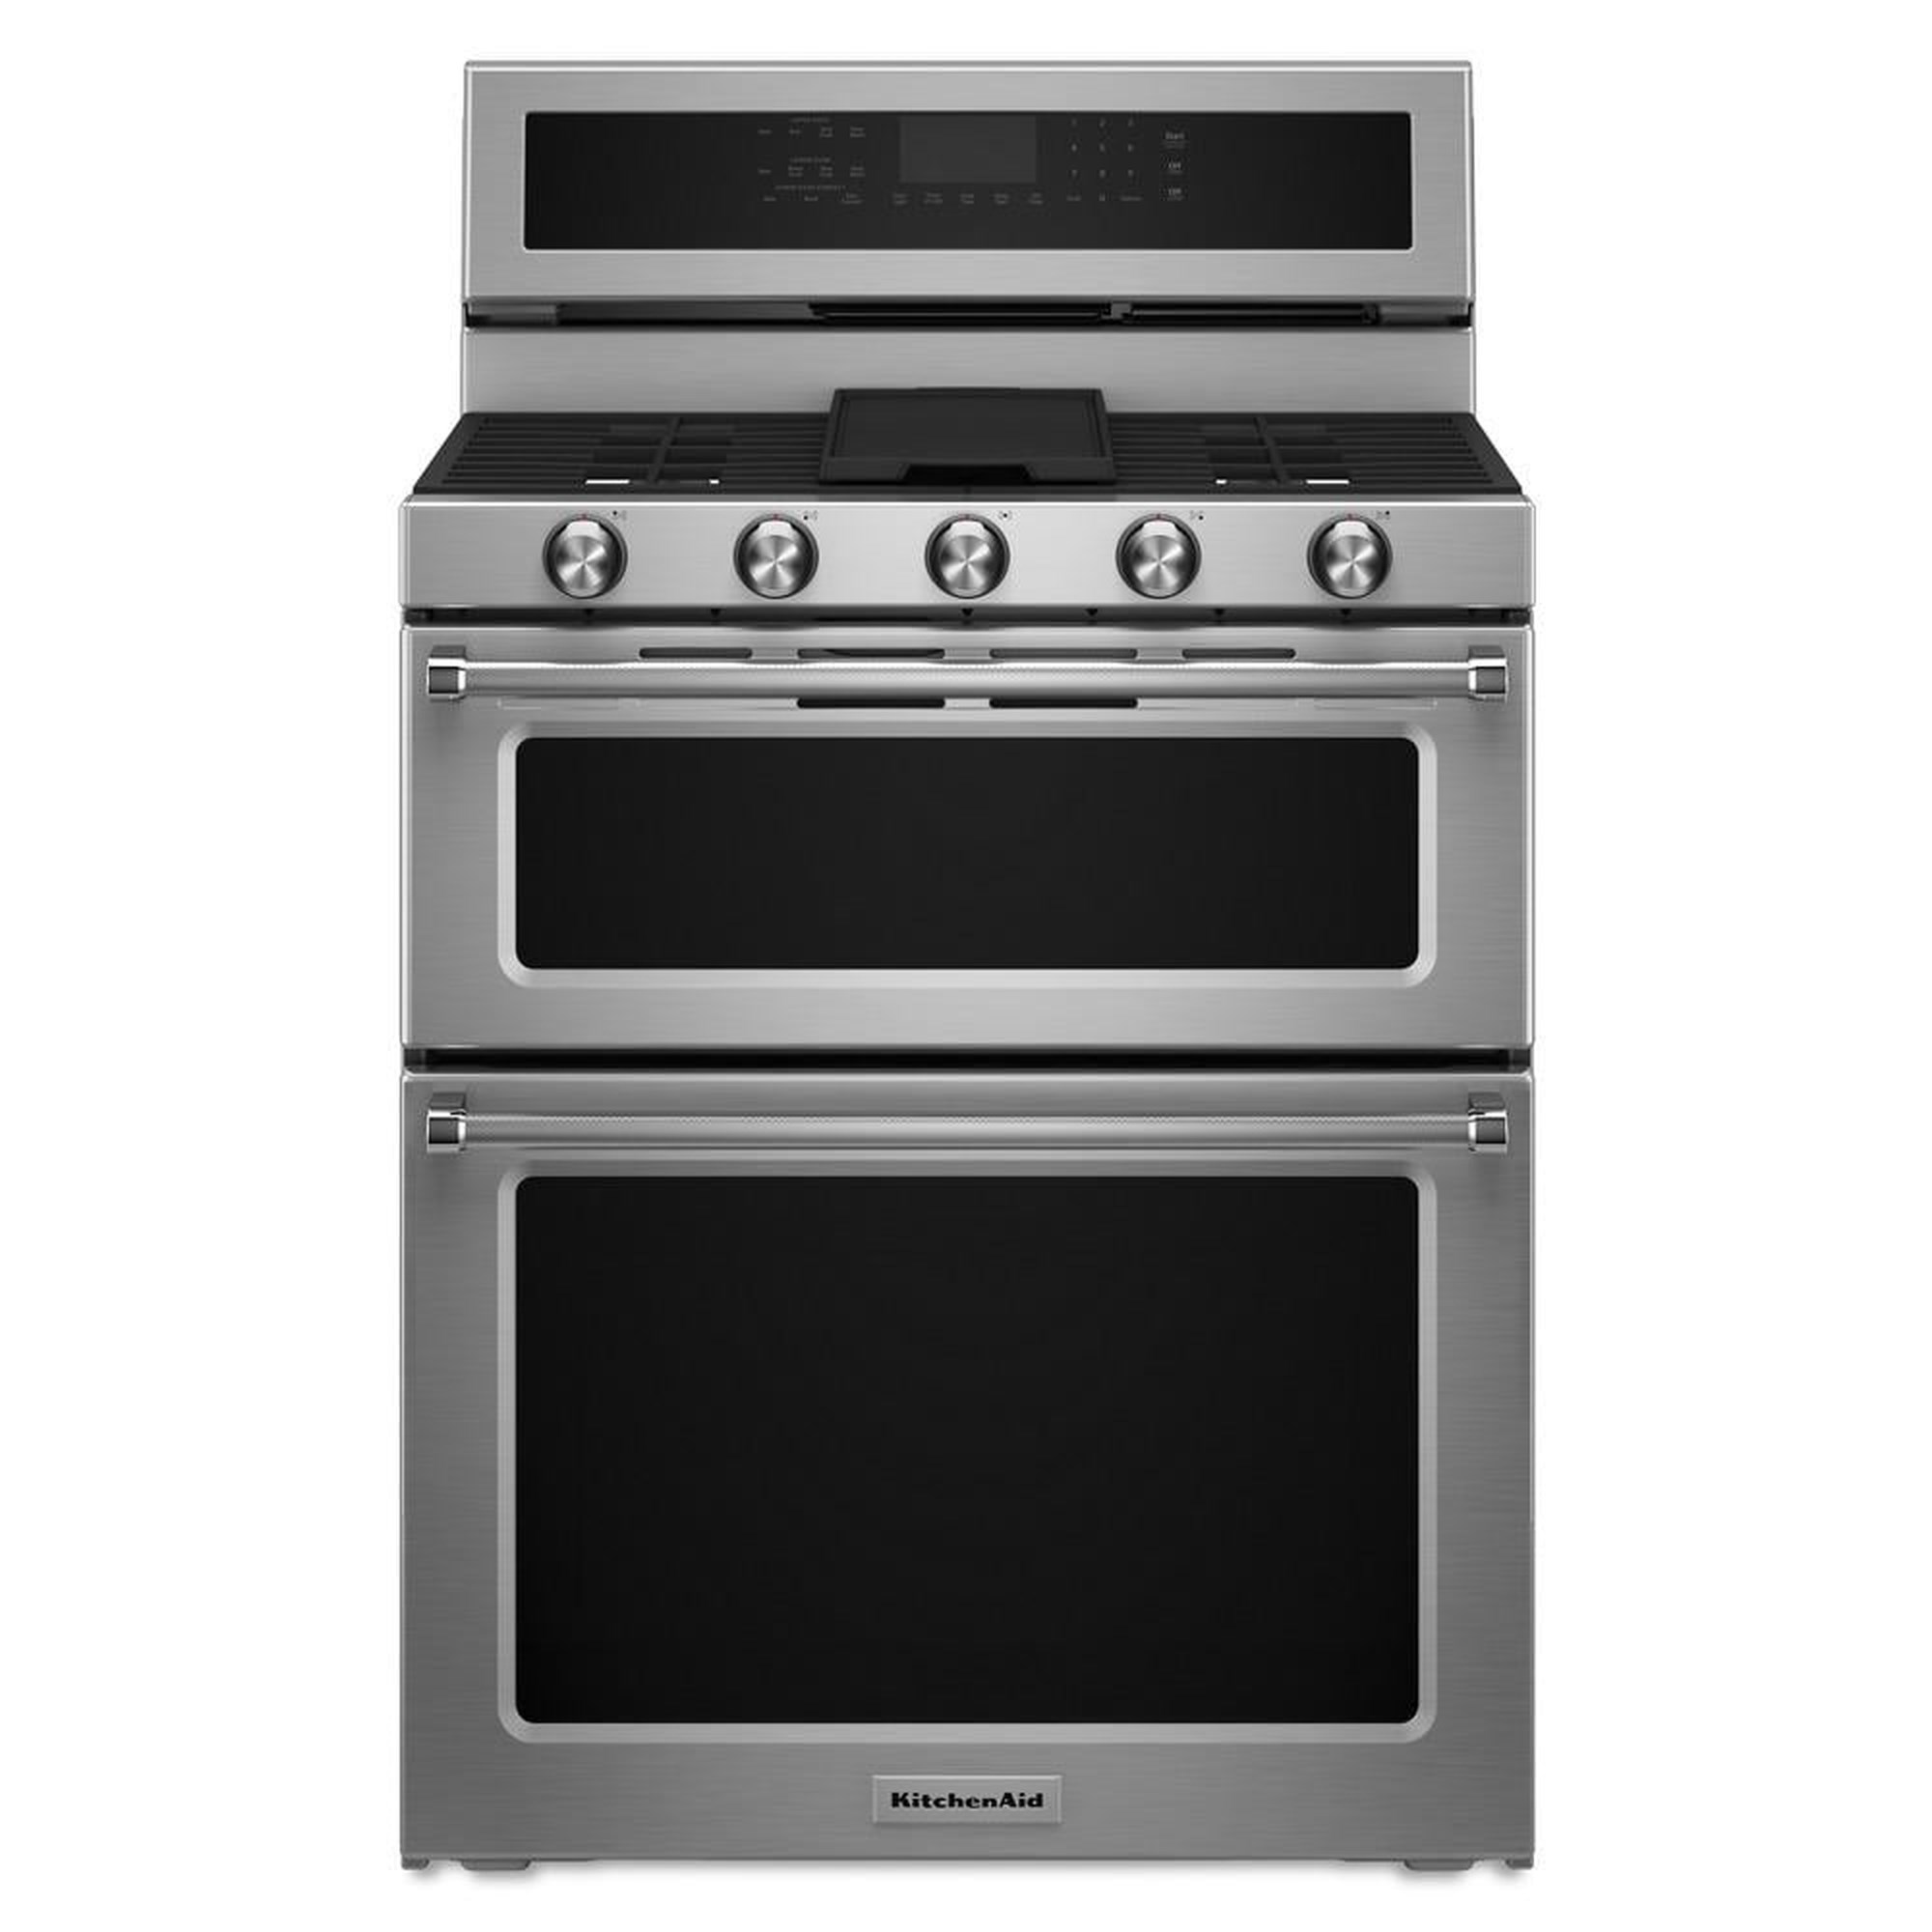 KitchenAid KFGD500ESS 30-Inch 5 Burner Gas Double Oven Convection